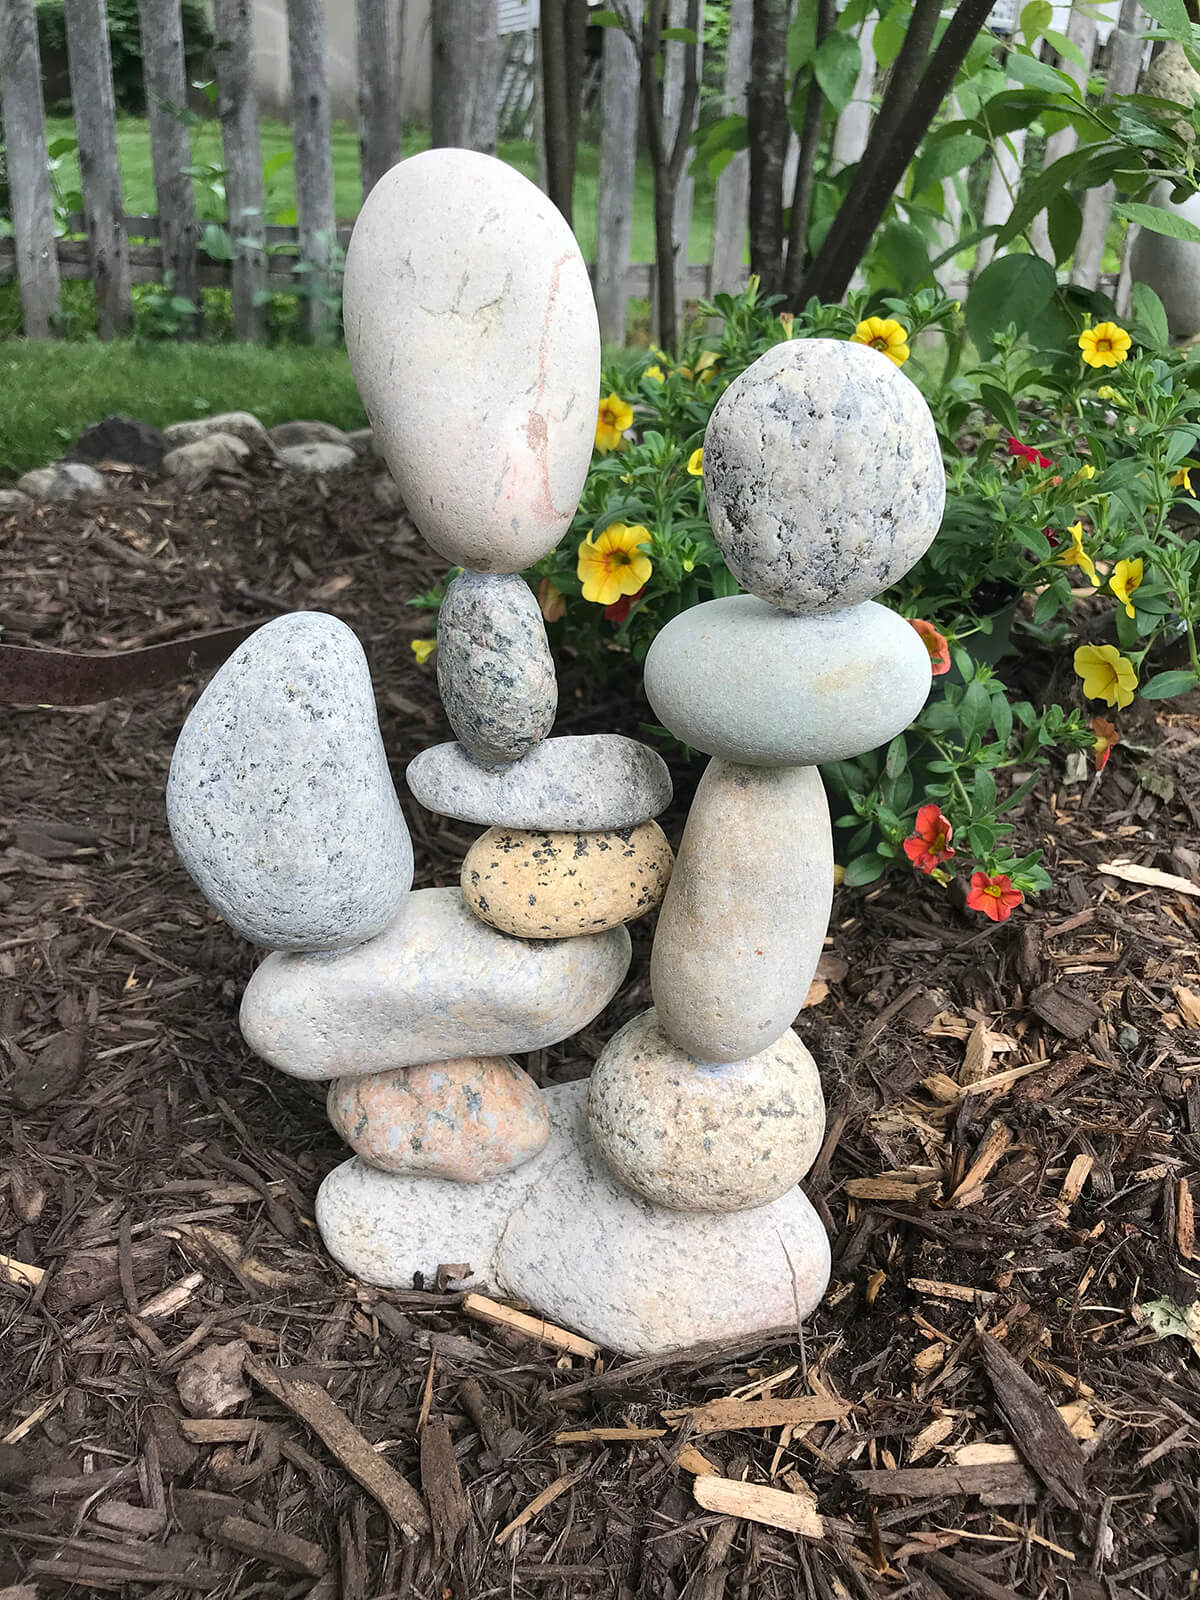 21 Best River Rock and Stone Garden Decorating Ideas for 2020